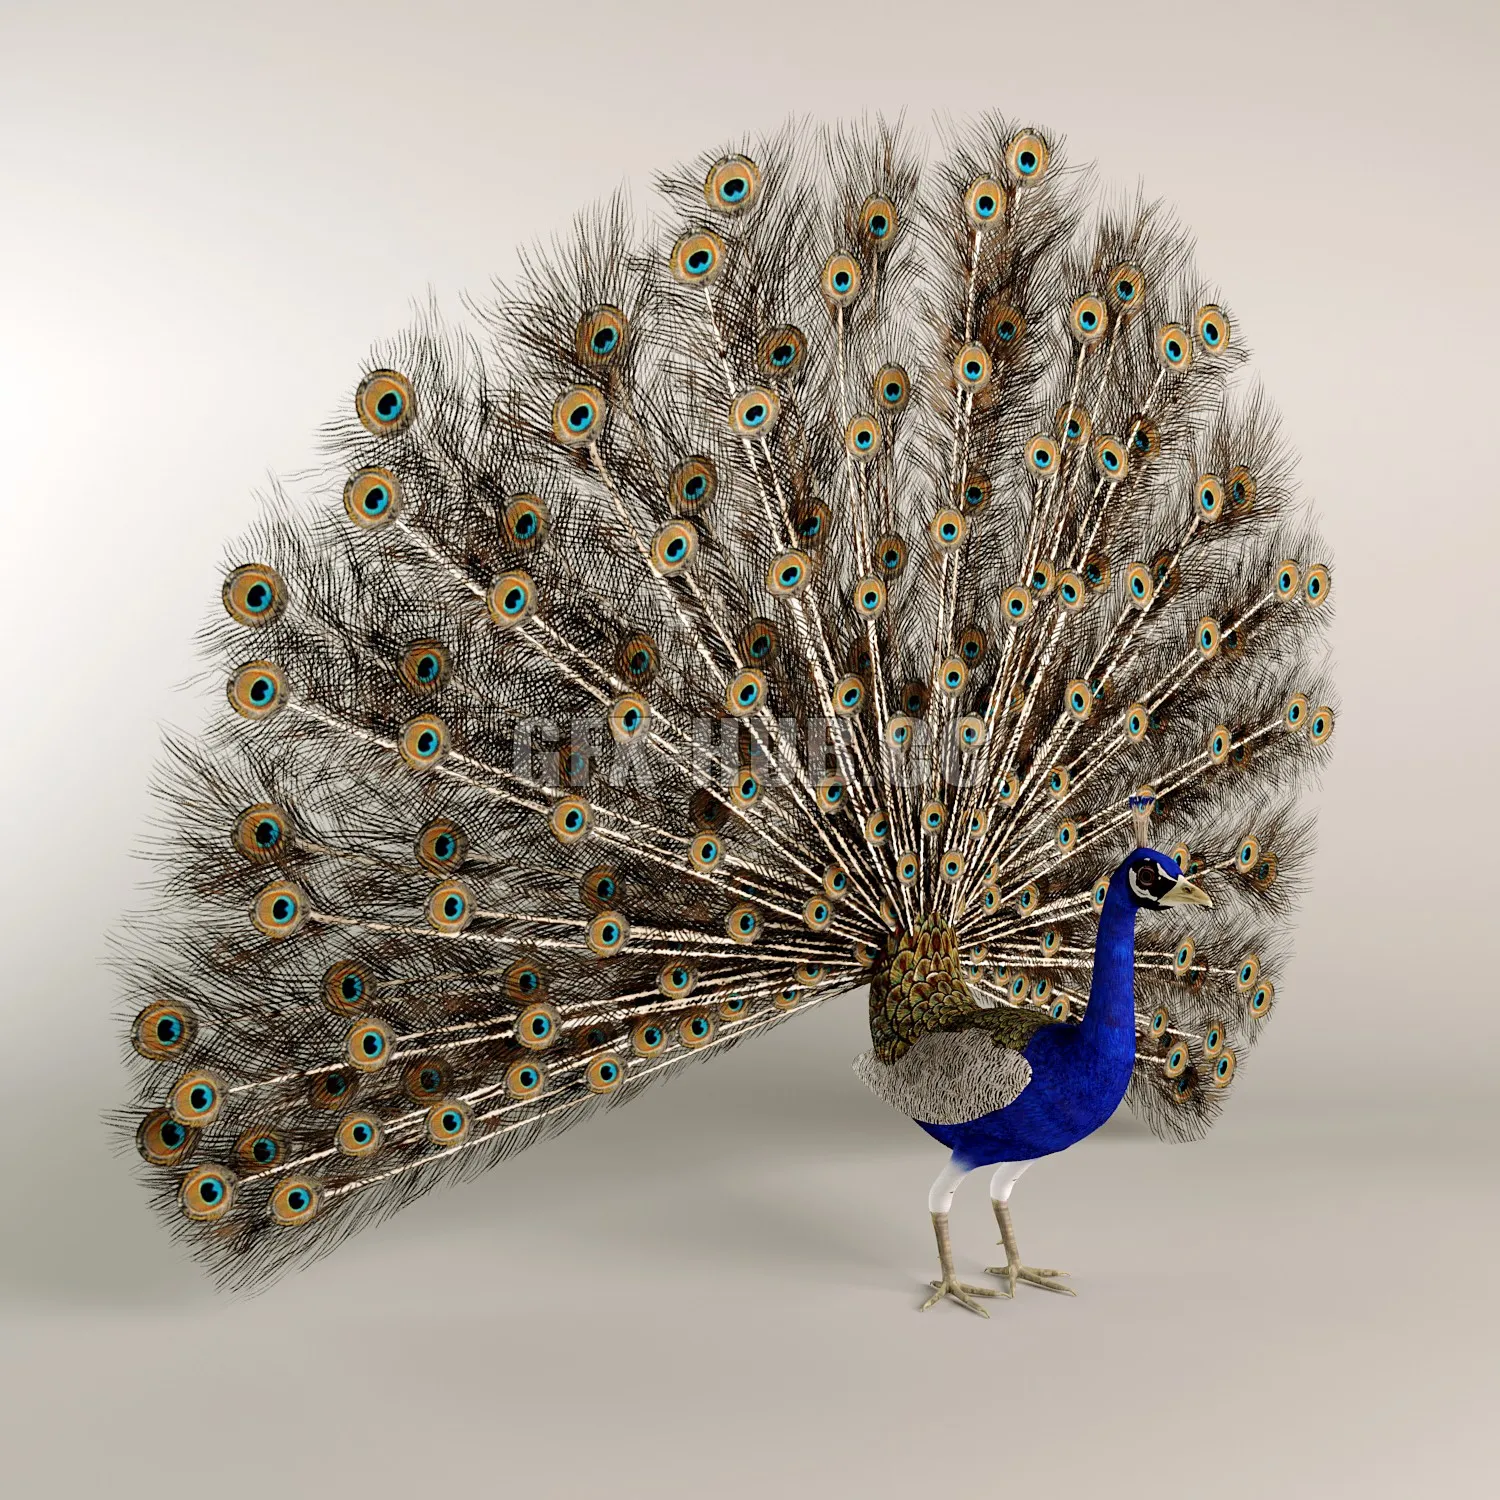 FURNITURE 3D MODELS – Peacock with open tail